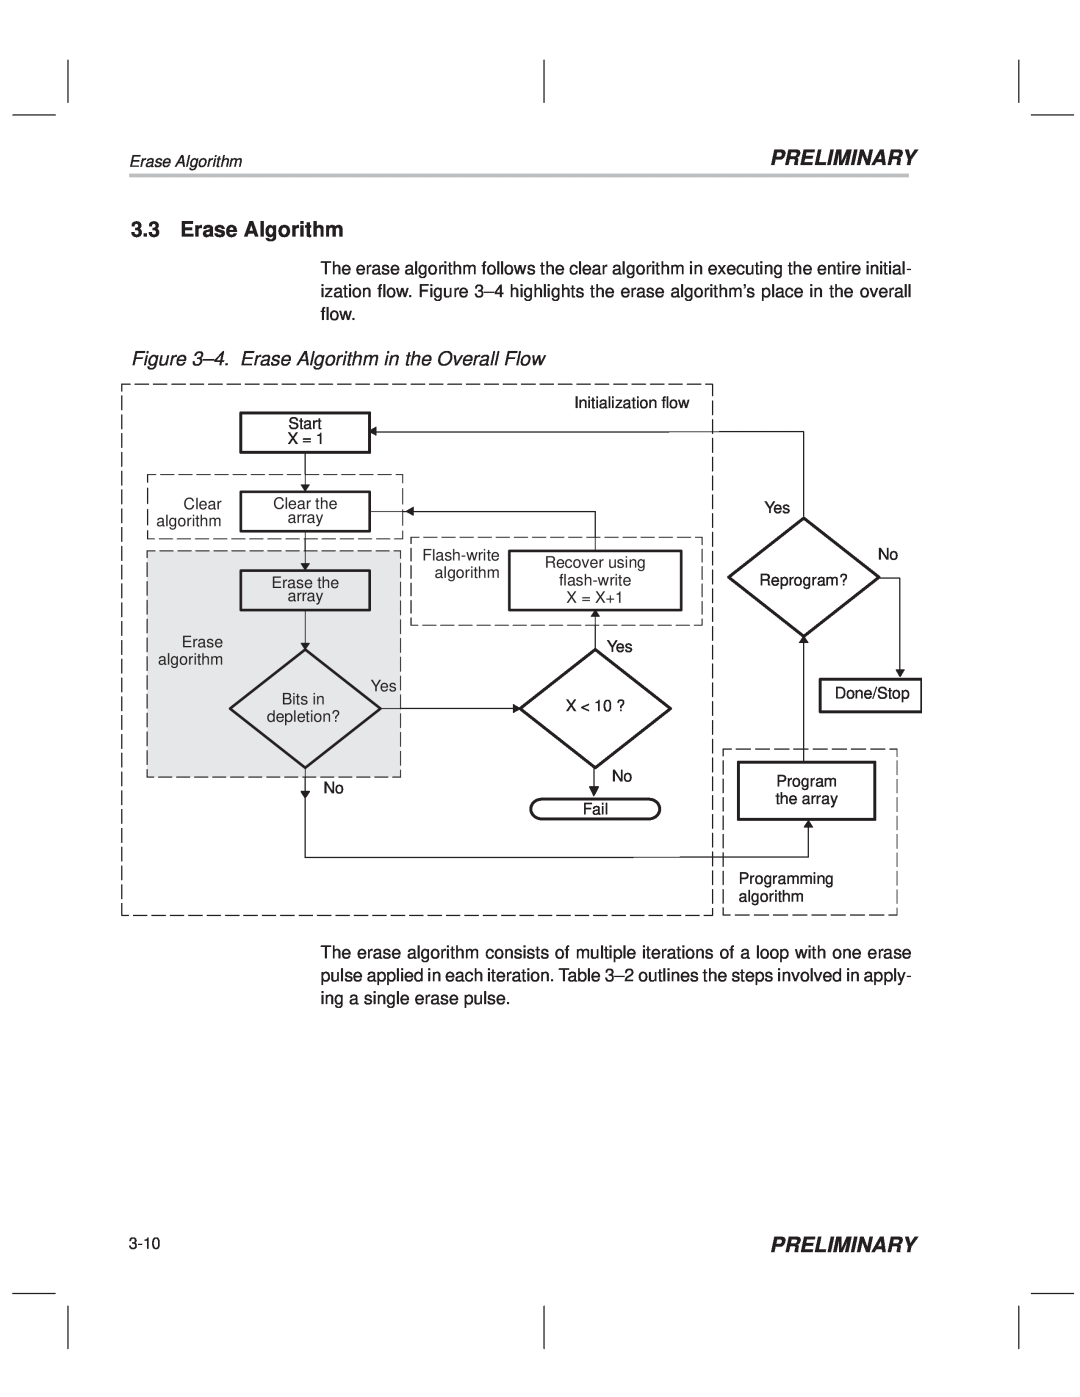 Texas Instruments TMS320F20x/F24x DSP manual ±4. Erase Algorithm in the Overall Flow, Preliminary 